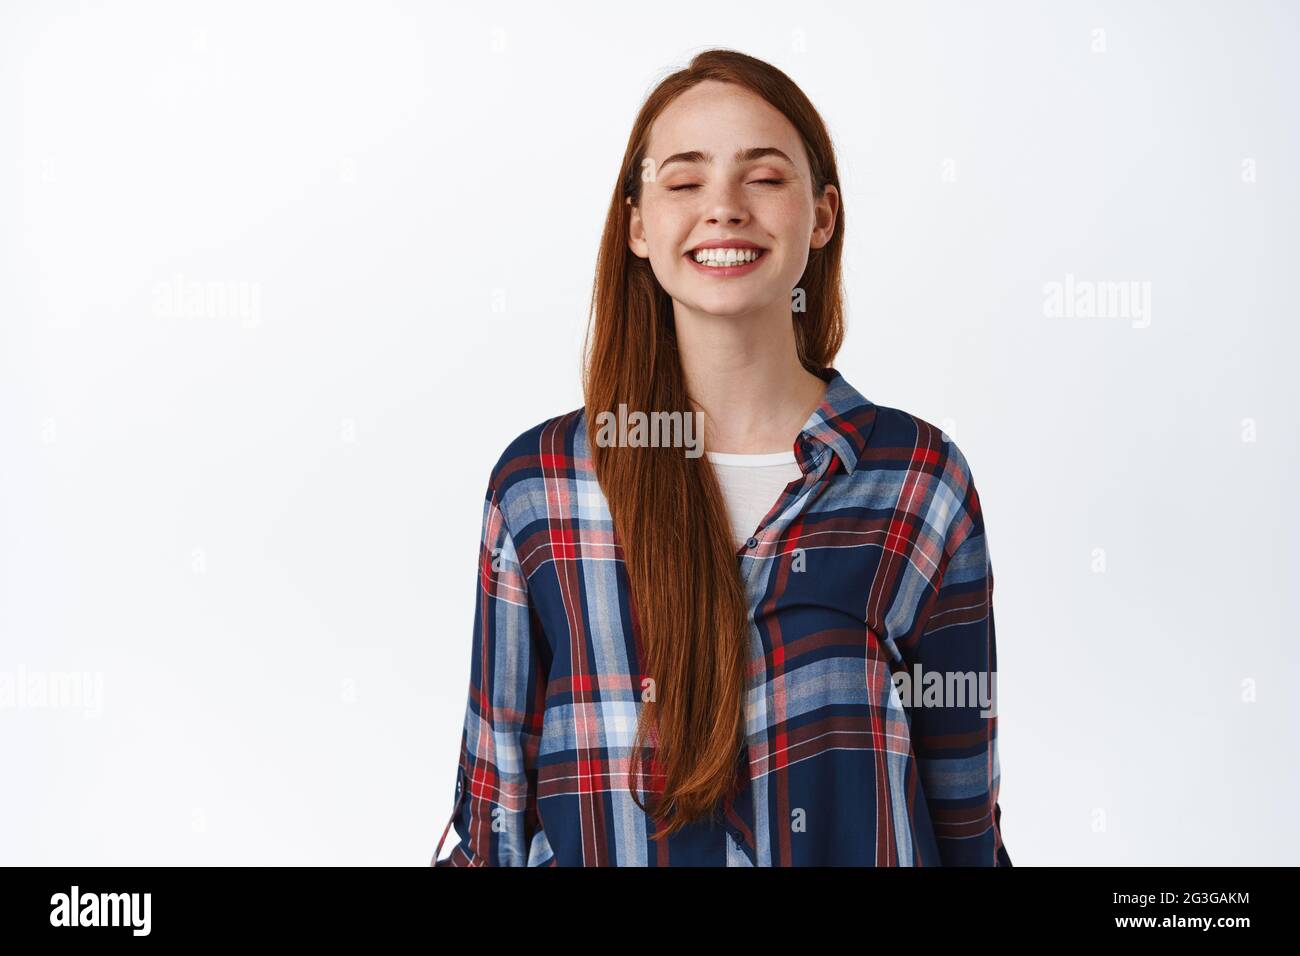 People and lifestyle. Happy beautiful redhead girl with long natural hair, freckles and no make up, dreaming of something, imaging and smiling with Stock Photo